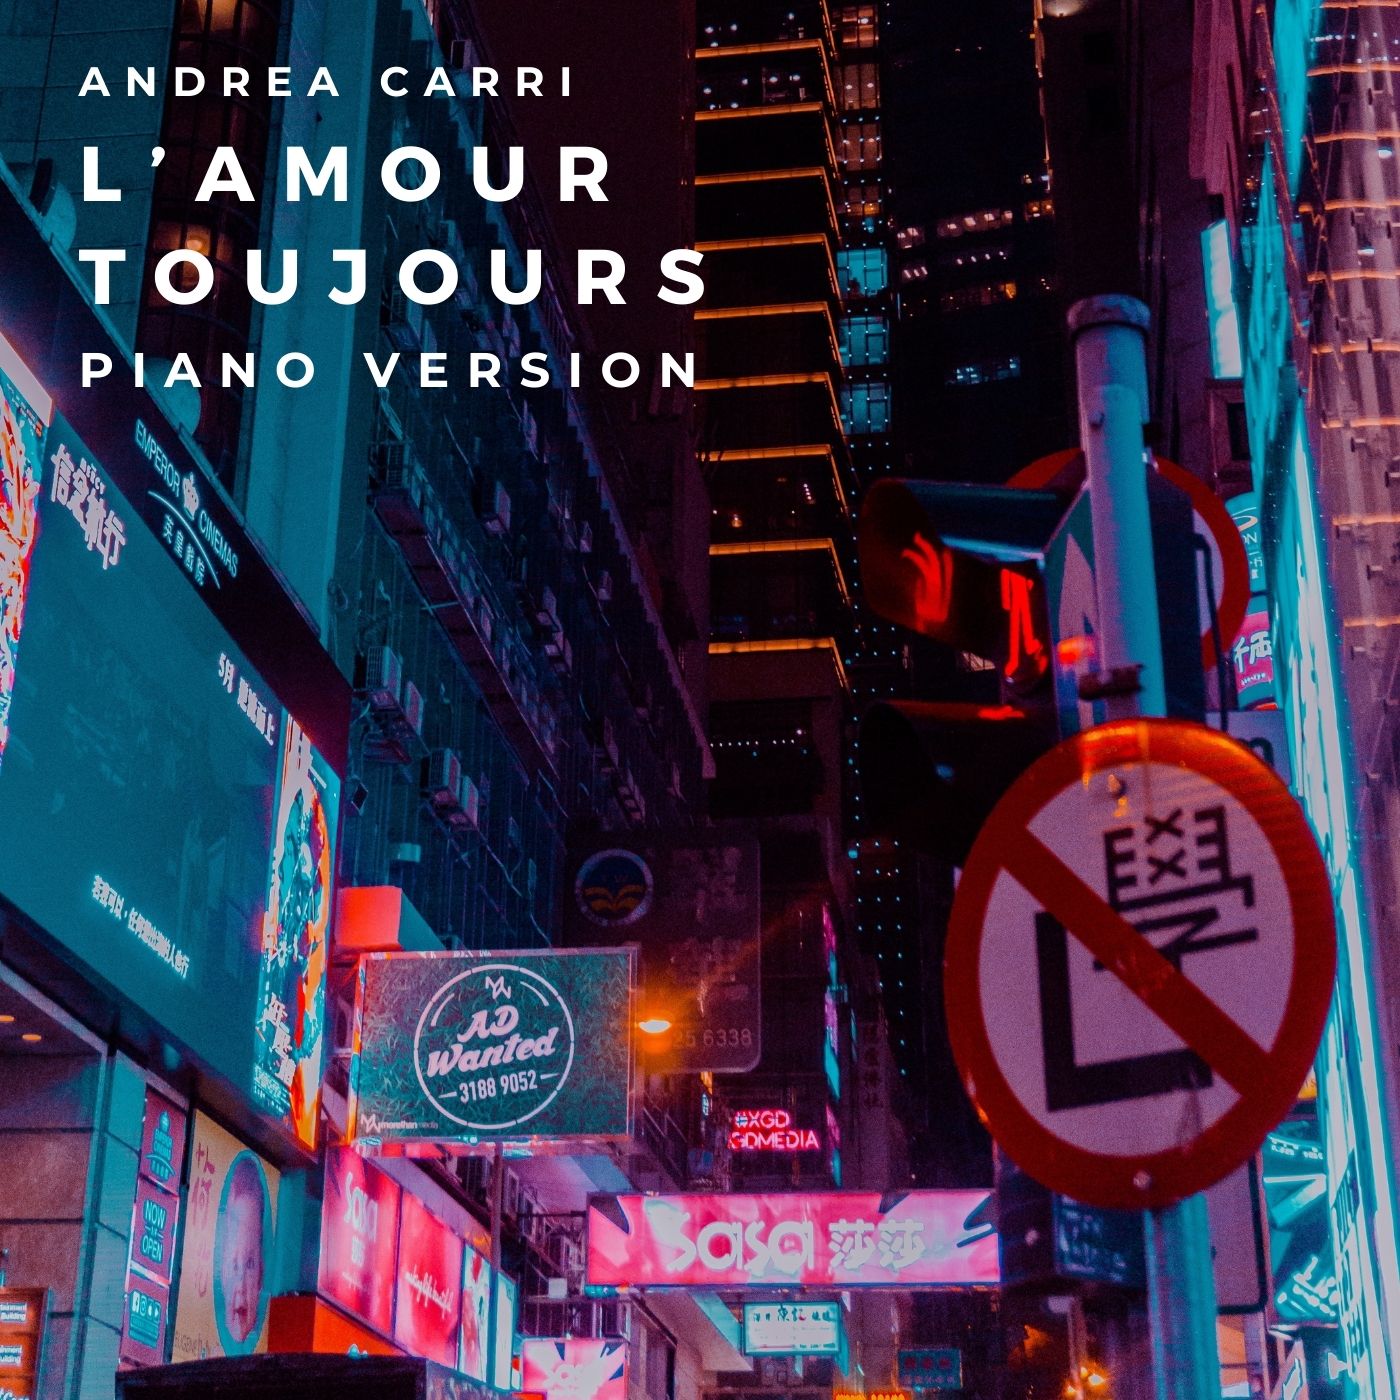 L'amour toujours - Piano Version